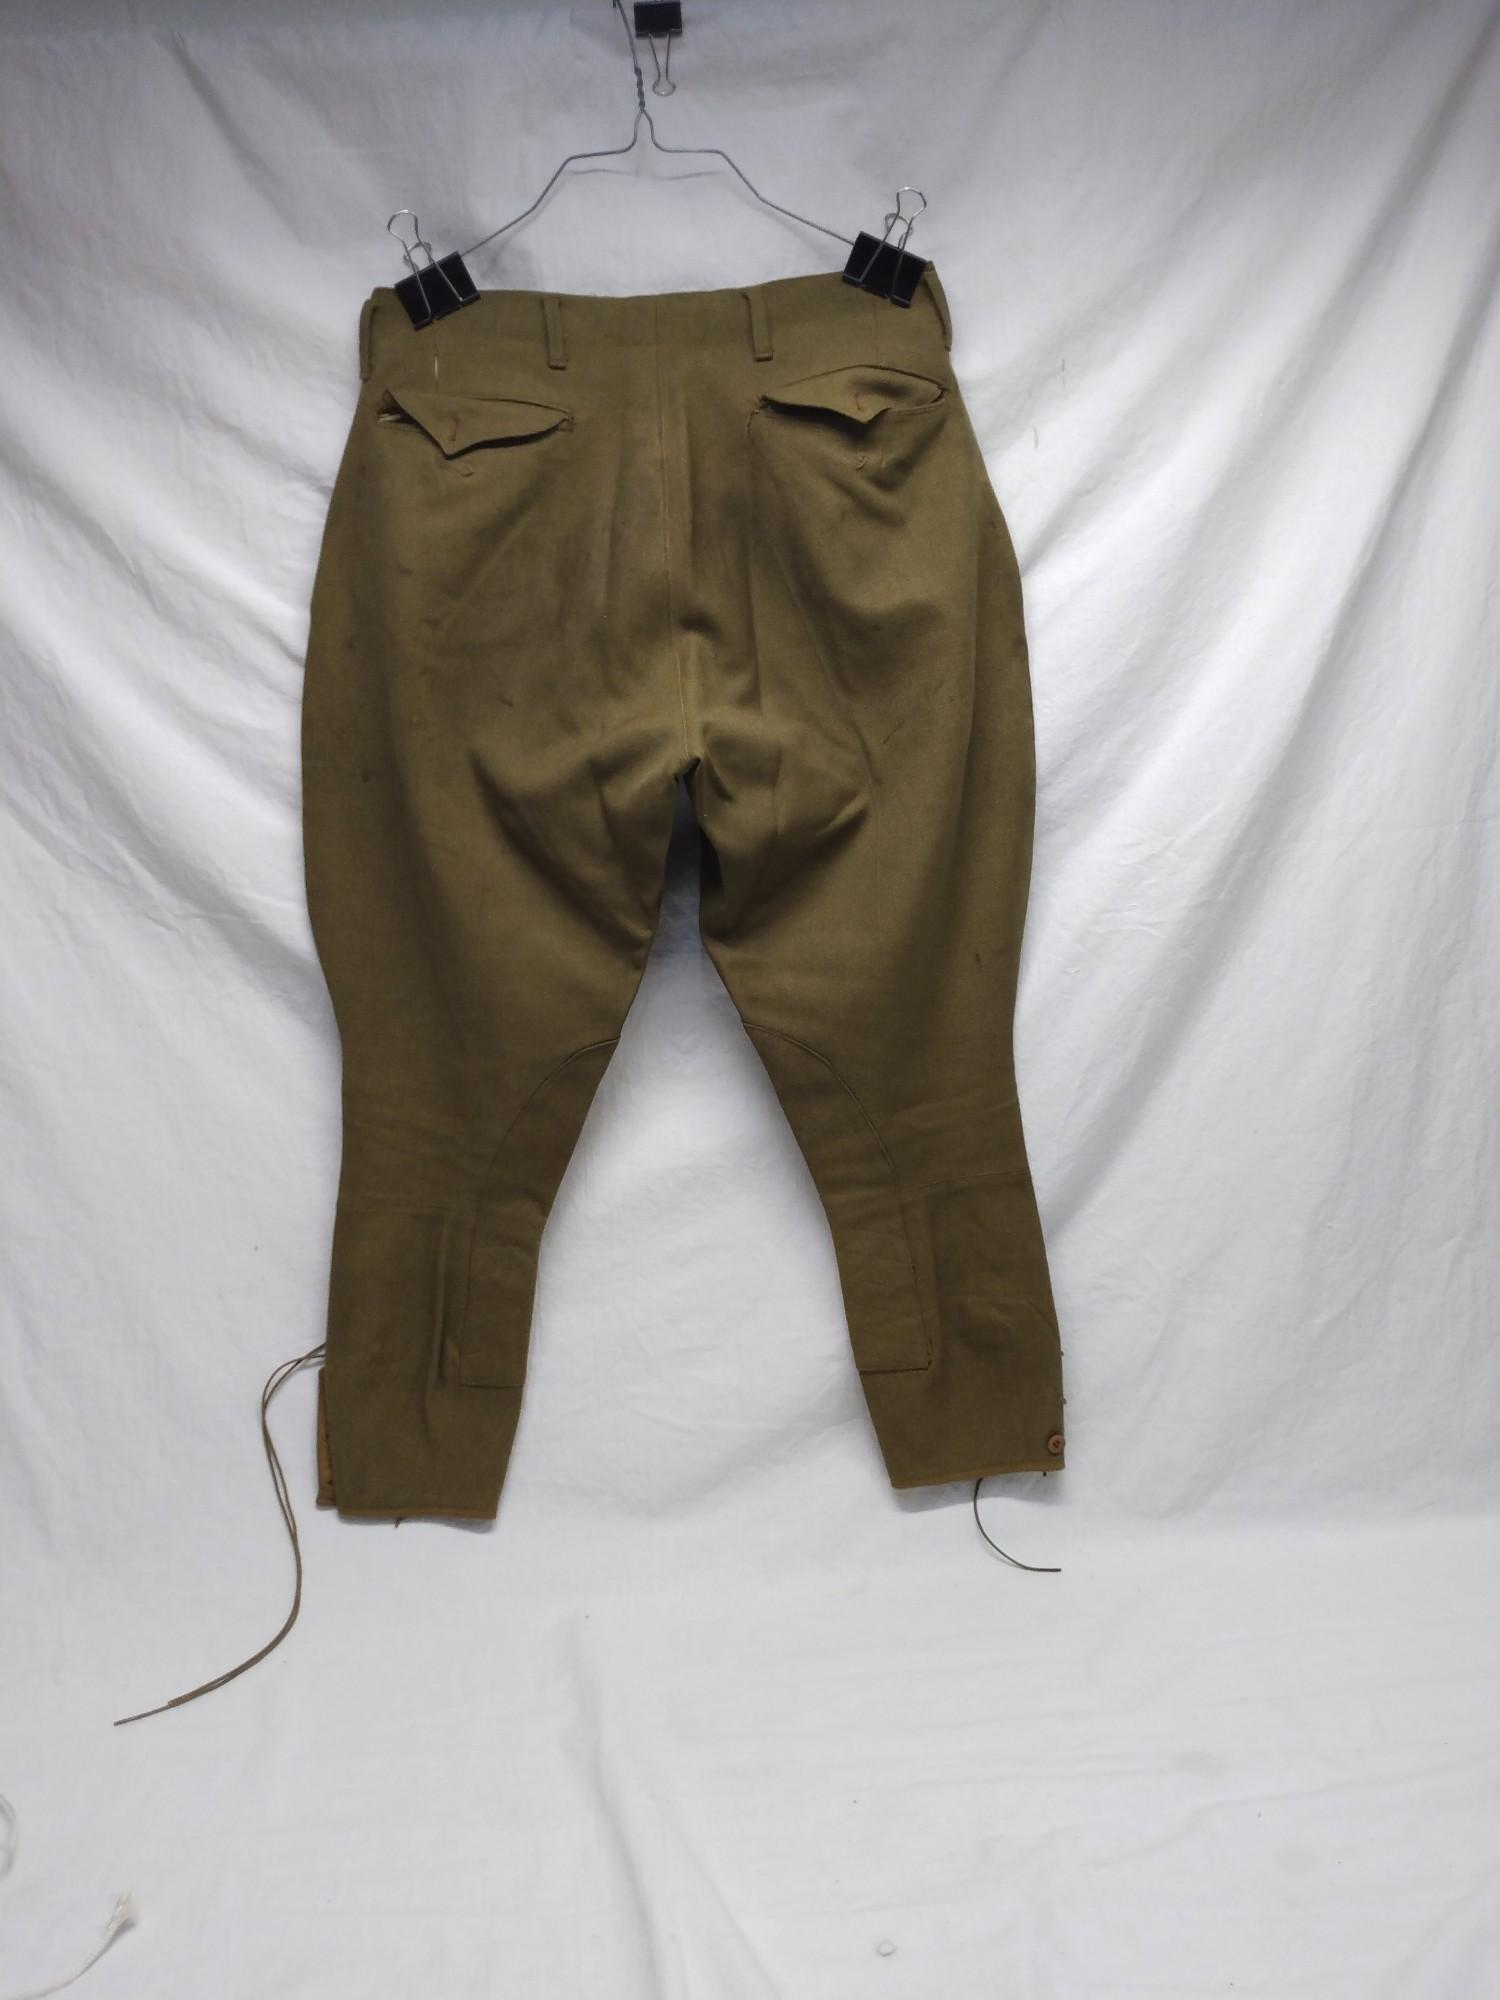 WWII pants